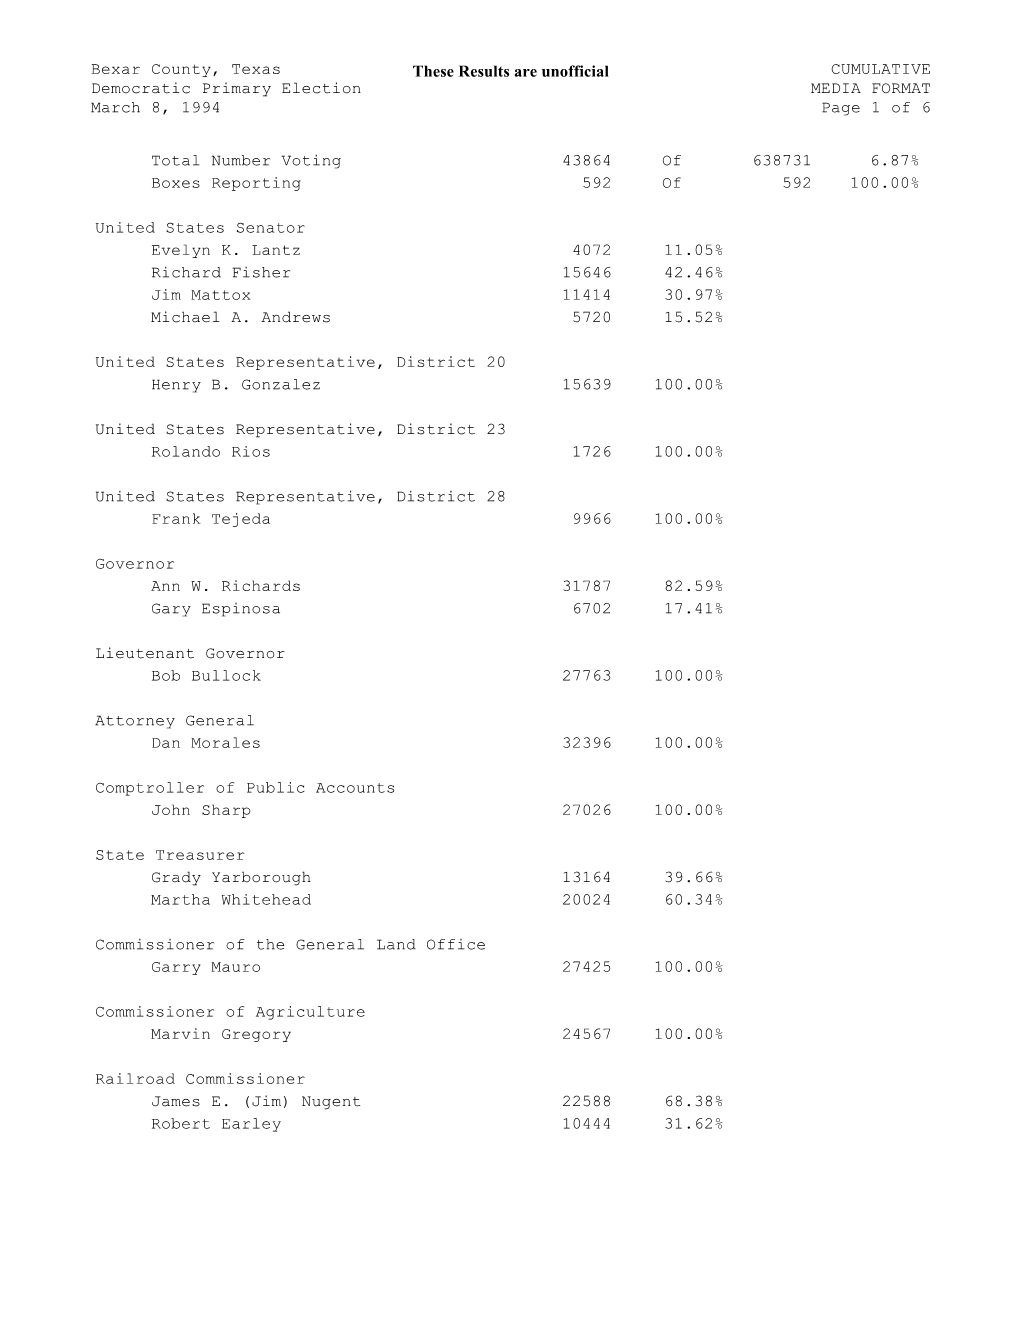 Bexar County, Texas Democratic Primary Election March 8, 1994 These Results Are Unofficial CUMULATIVE MEDIA FORMAT Page 1 Of